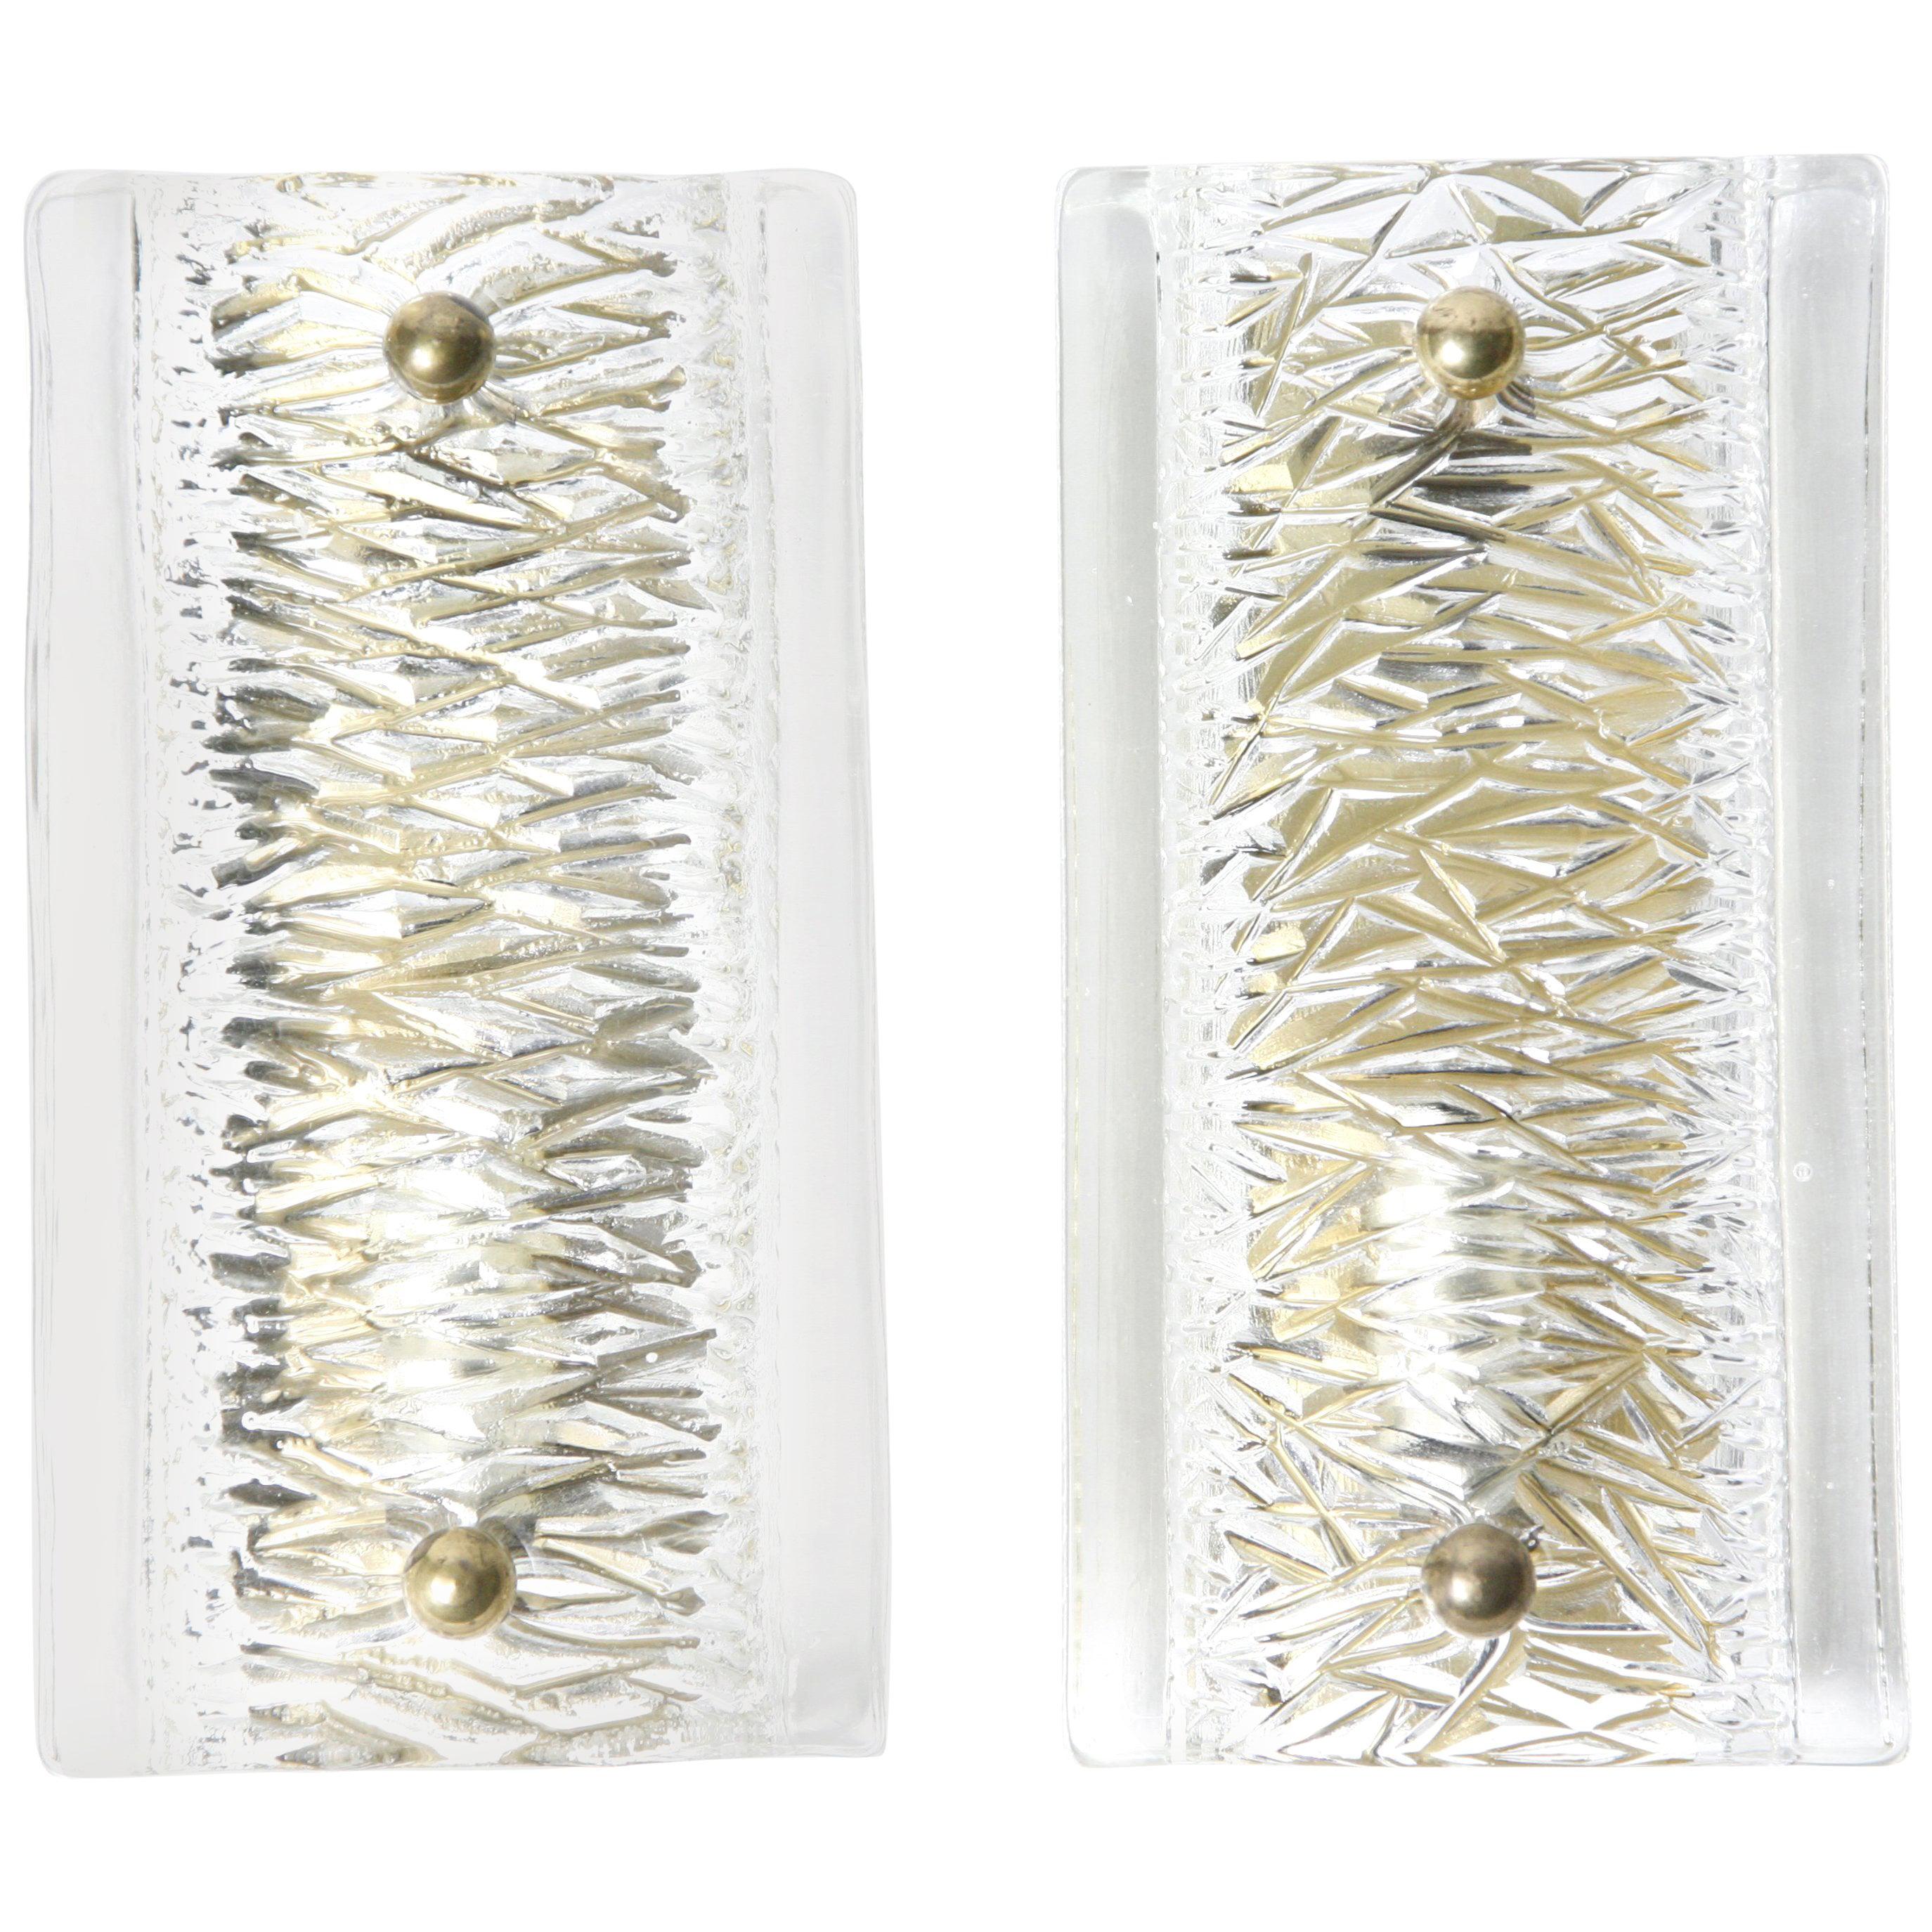 Pair of Orrefors clear cast crystal glass sconces with reflections in rainbow colors, smooth surface outer glass and an inside pattern, glass shades are resting on a brass frame with brass fasteners.
Hold one candelabra bulb each.